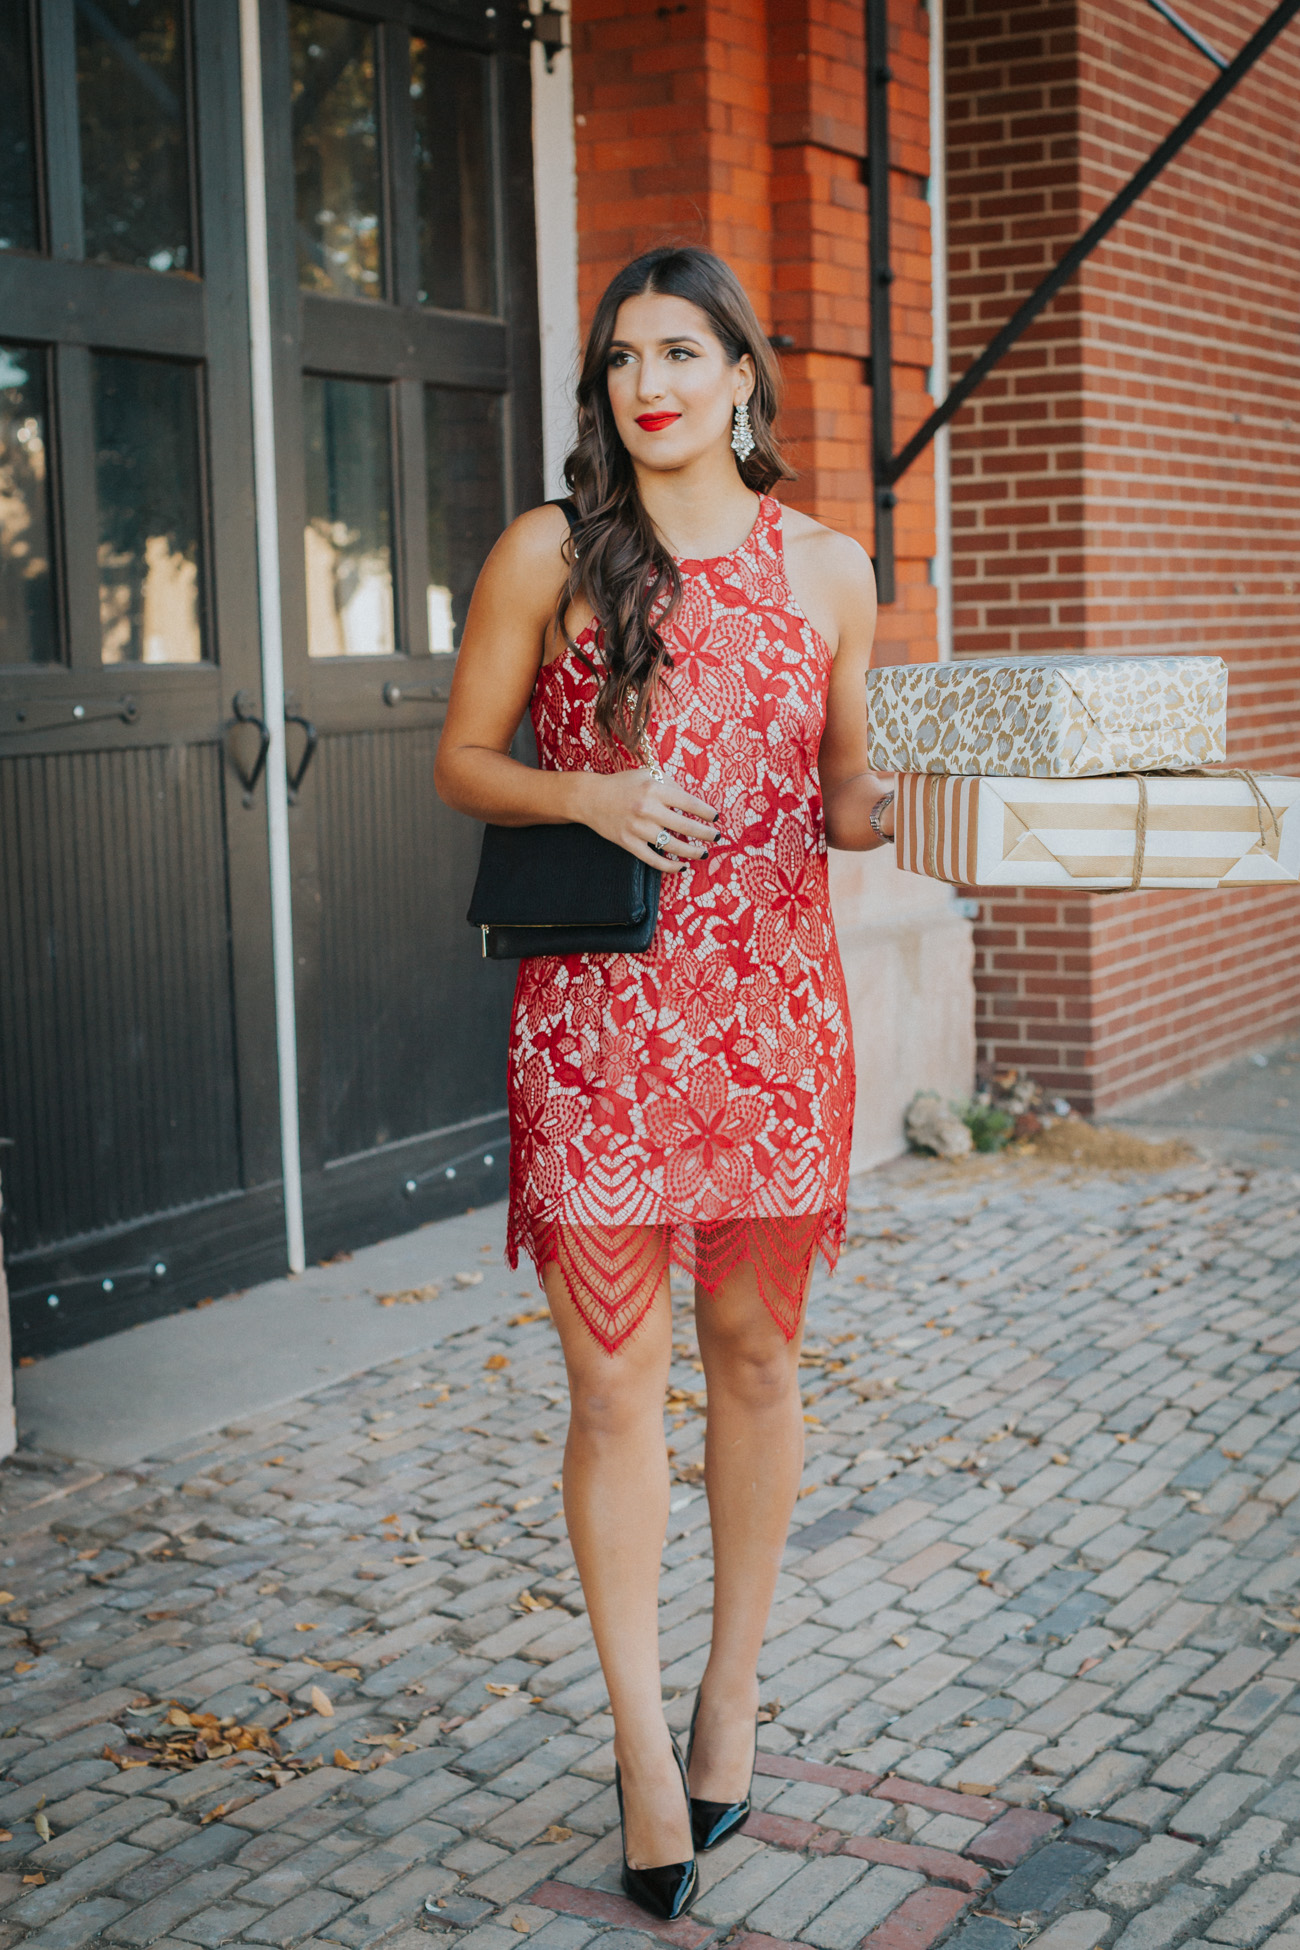 express dress, red lace dress, holiday party outfit, holiday style, holiday dress, christmas dress, christmas party outfit, winter style, black foldover clutch, black pumps, cute holiday look, feminine holiday party, twine present, gold stripe wrapping paper, southern fashion blogger // grace wainwright a southern drawl